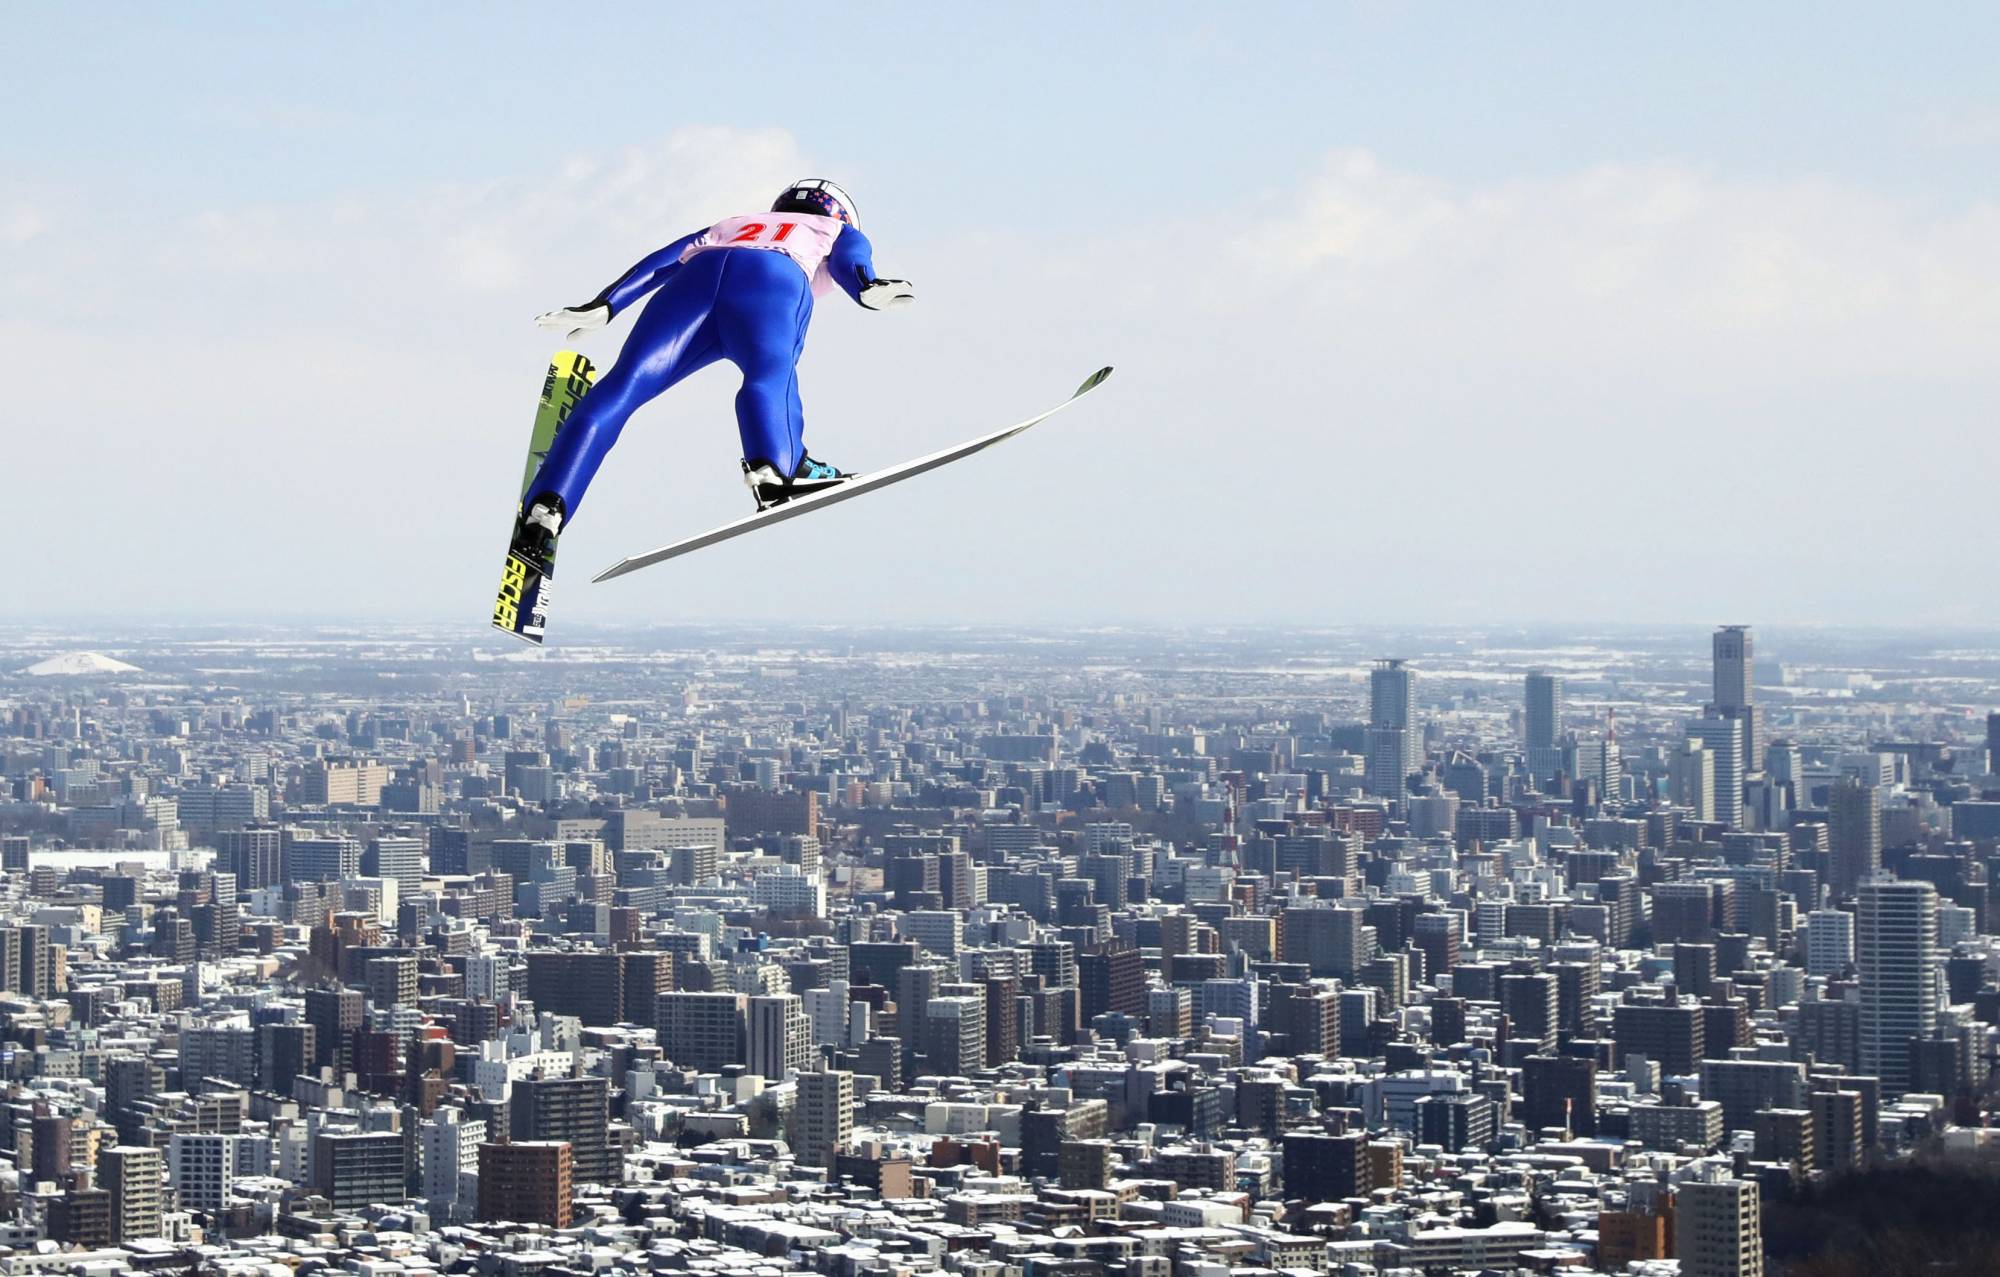 A ski jumper participates in a competition in Sapporo in March 2017. Hokkaido's largest city is seeking to win the right to host the 2030 Winter Olympics and Paralympics. | KYODO